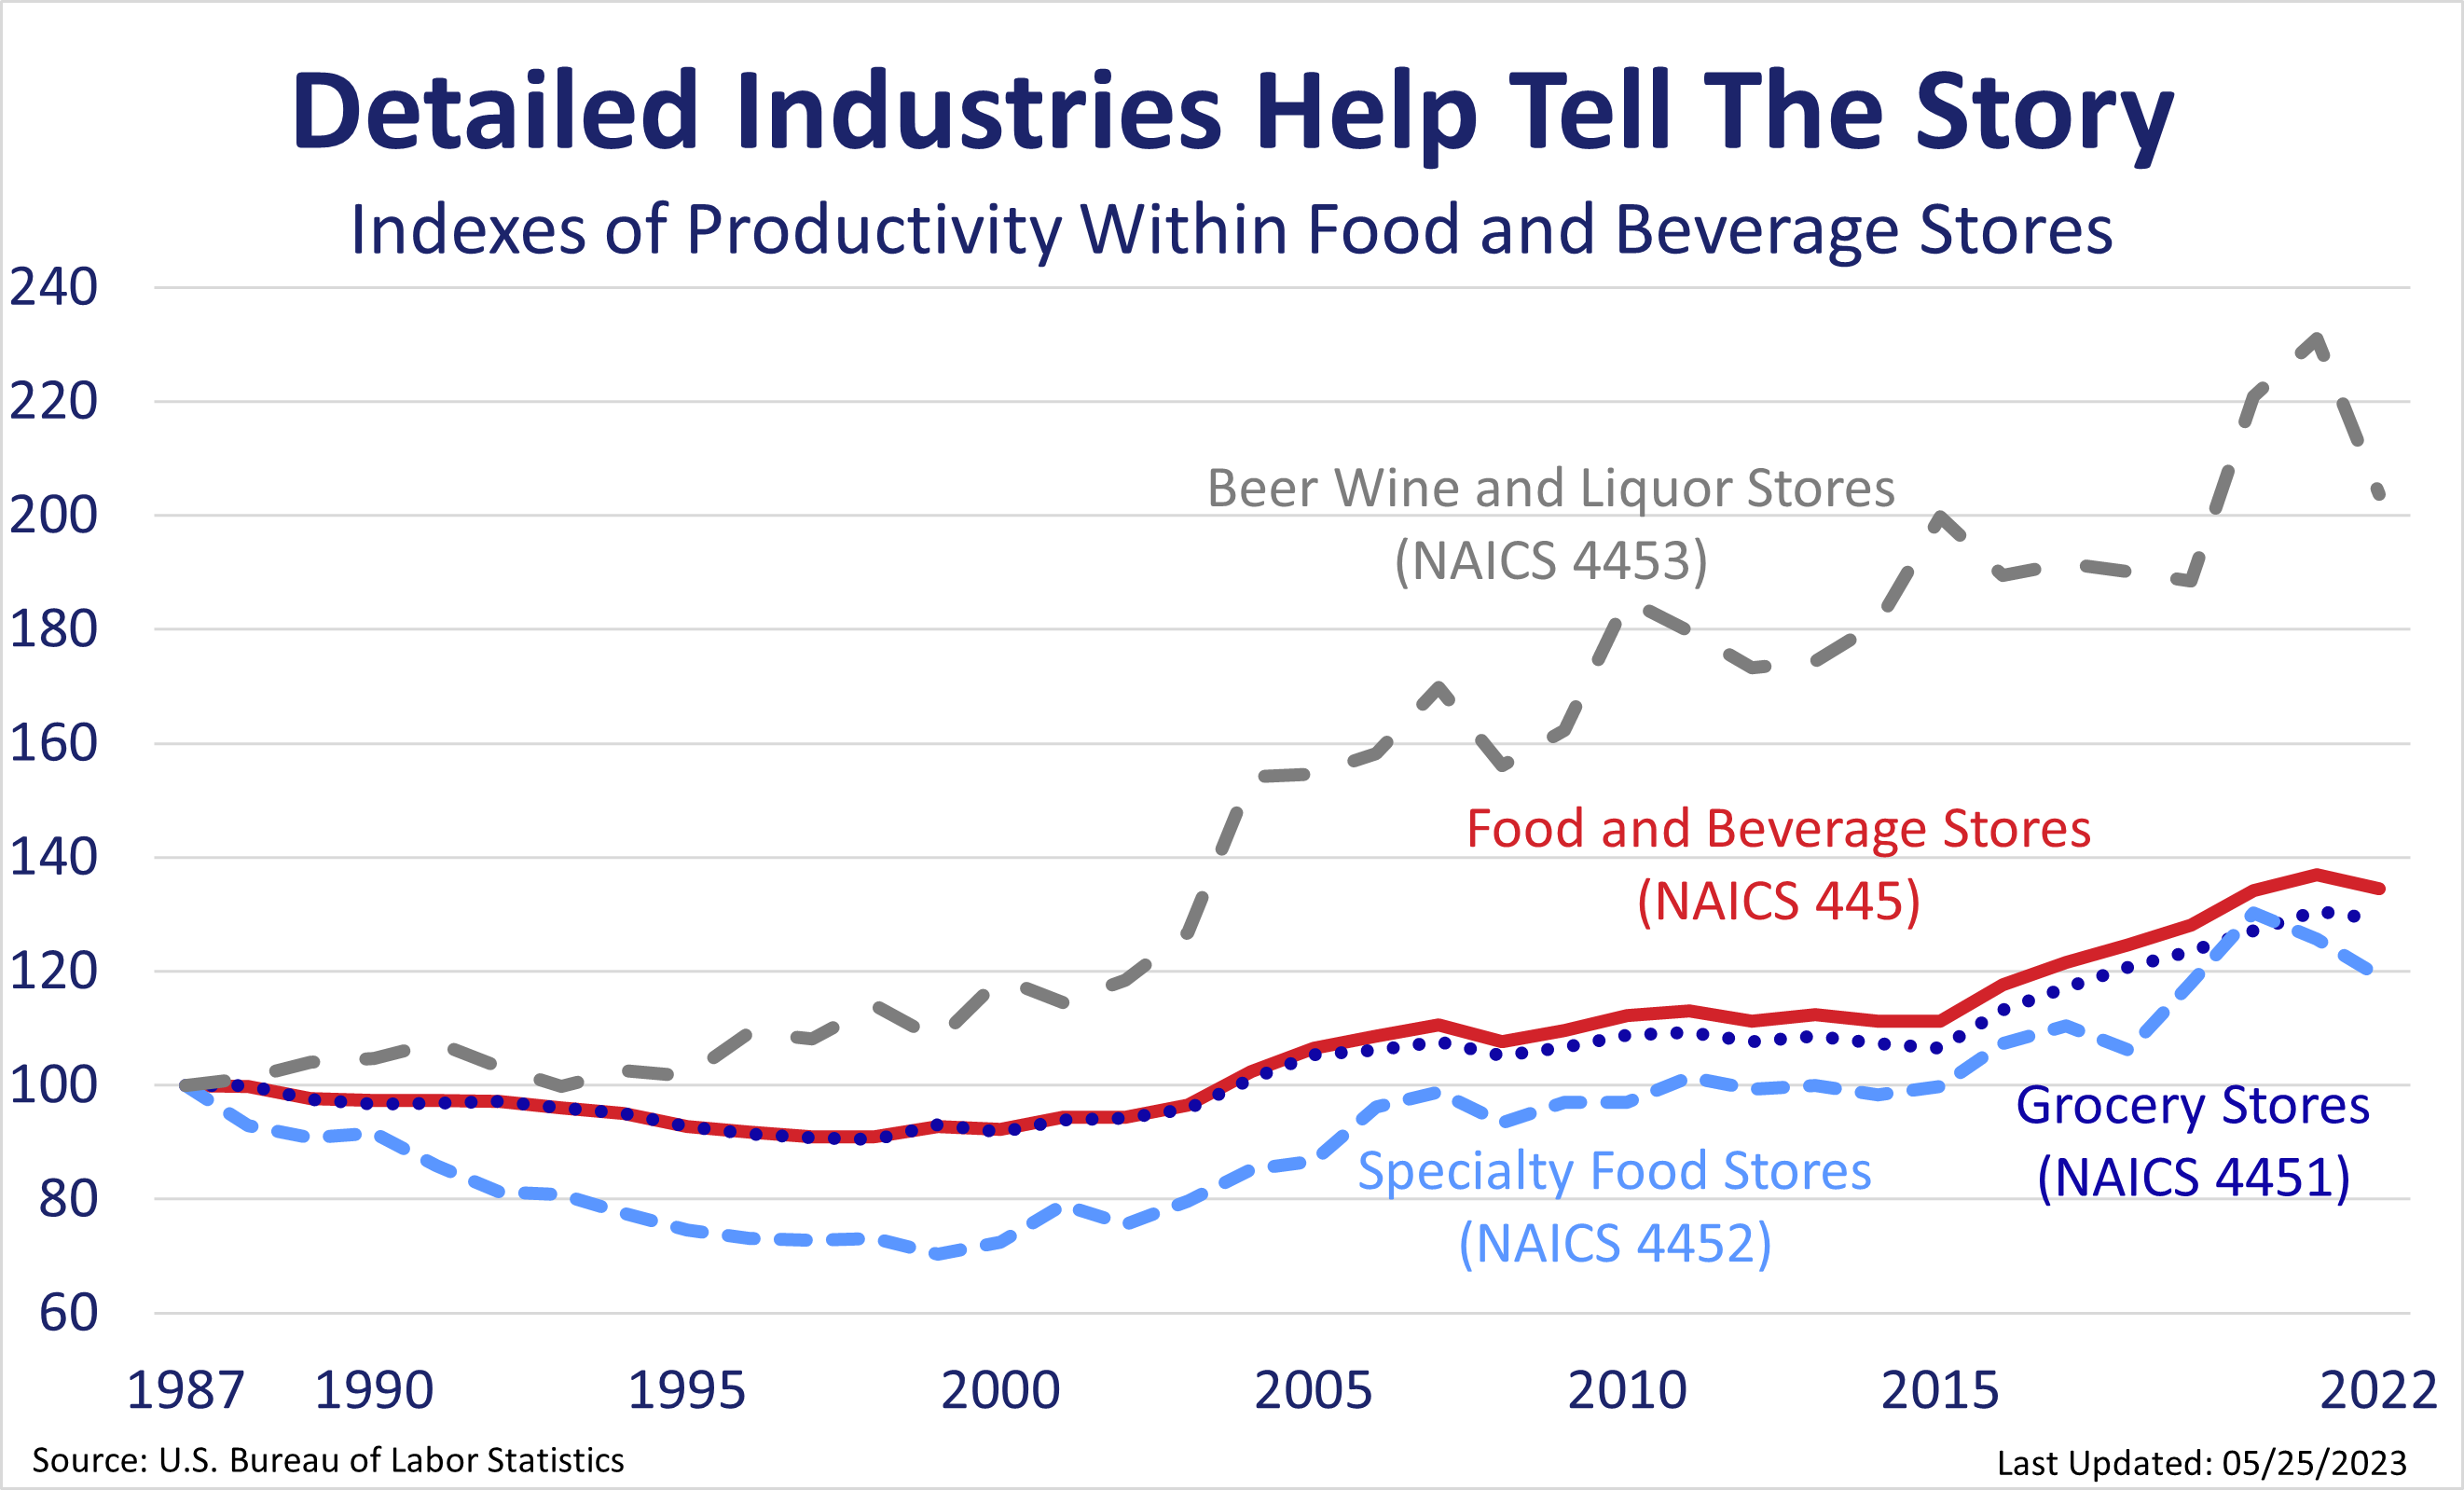 Line graph of detailed industries labor productivity indexes of food and beverage store industries: Beer and wine liquor stores (NAICS 4453), Food and beverage stores (NAICS 445), Grocery stores (NAICS 4451), and Specialty food stores (NAICS 4452)